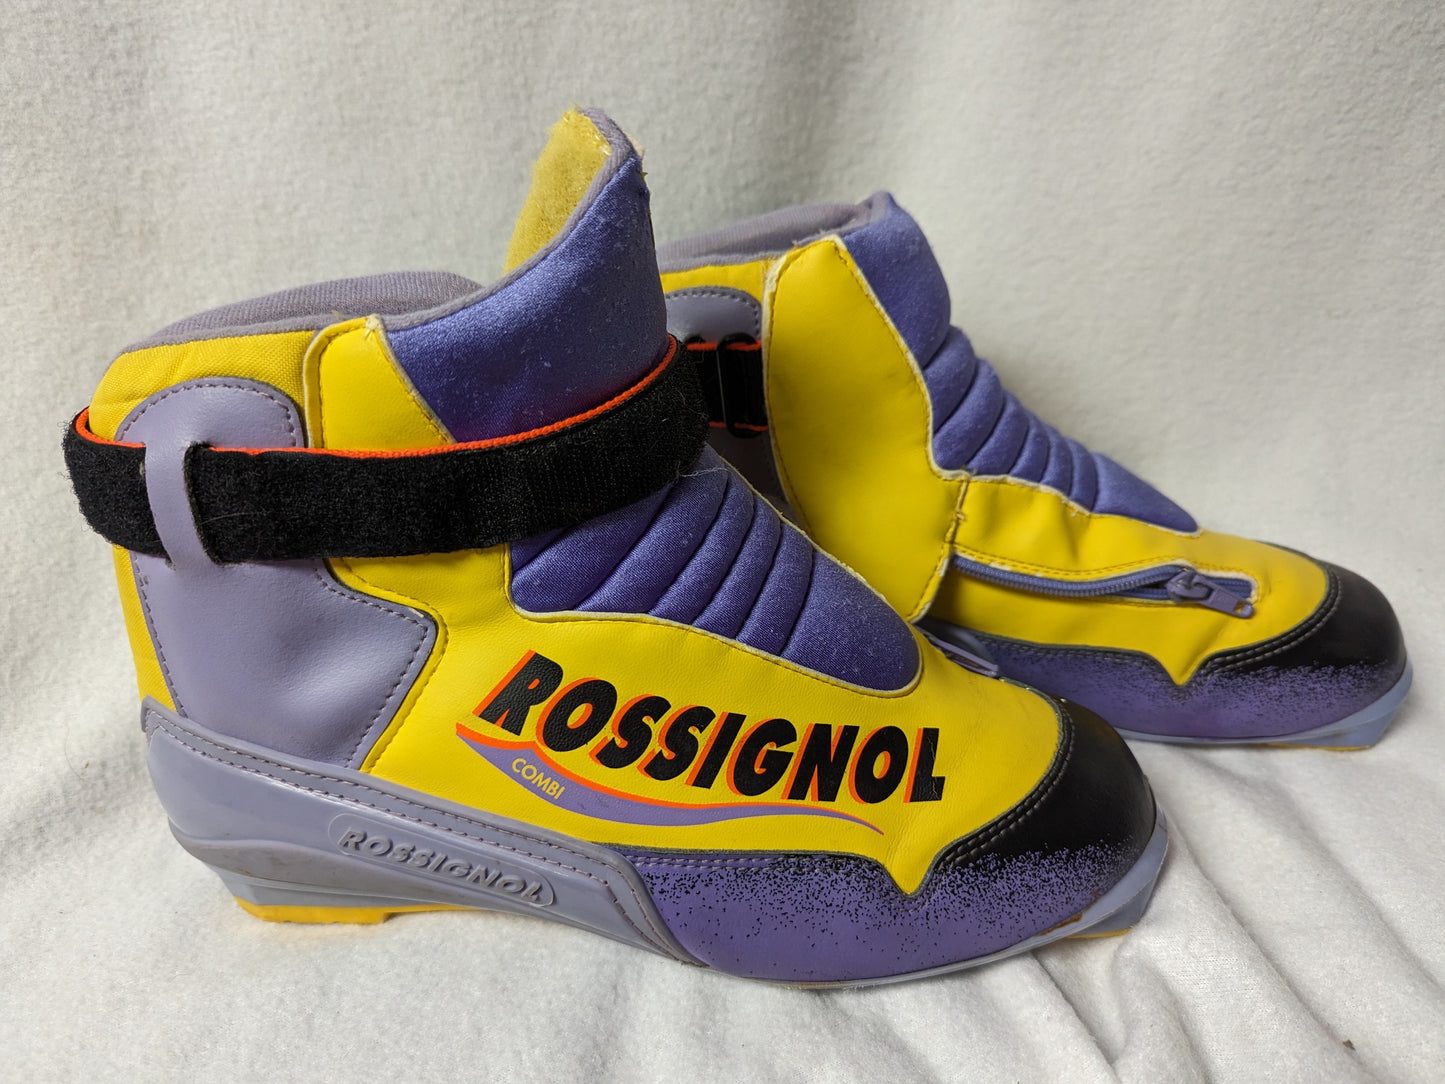 Rossignol Combi  XC Cross Country NNN II Ski Boots Size W8.5 Color Purple Condition Used